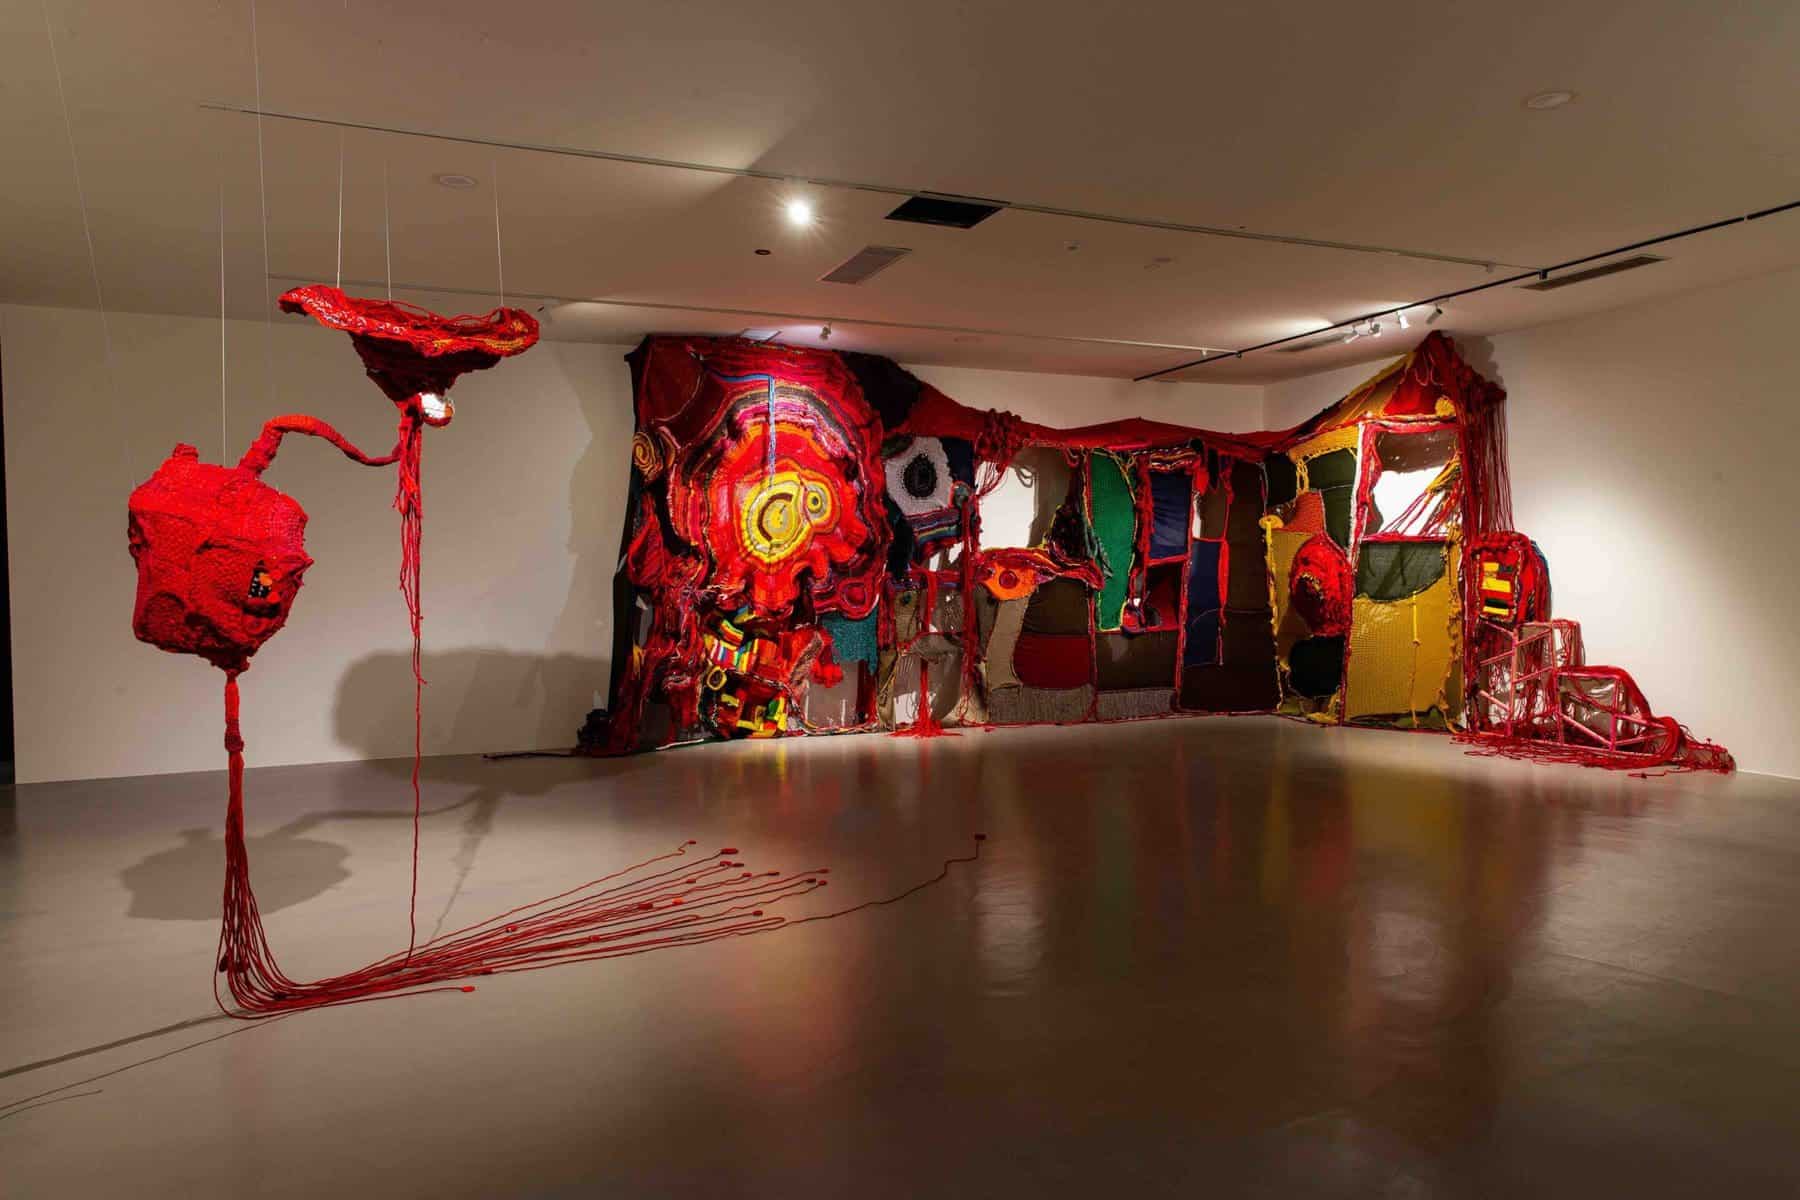 (Right) Aruwai Kaumakan, Vines in the Mountains, 2020, wool, ramie, cotton, copper, silk, glass beads, dimensions variable. (Left) Aruwai Kaumakan, The Axis of Life, 2018, recycled fabric, cotton, organic cotton, 500×120×100 cm